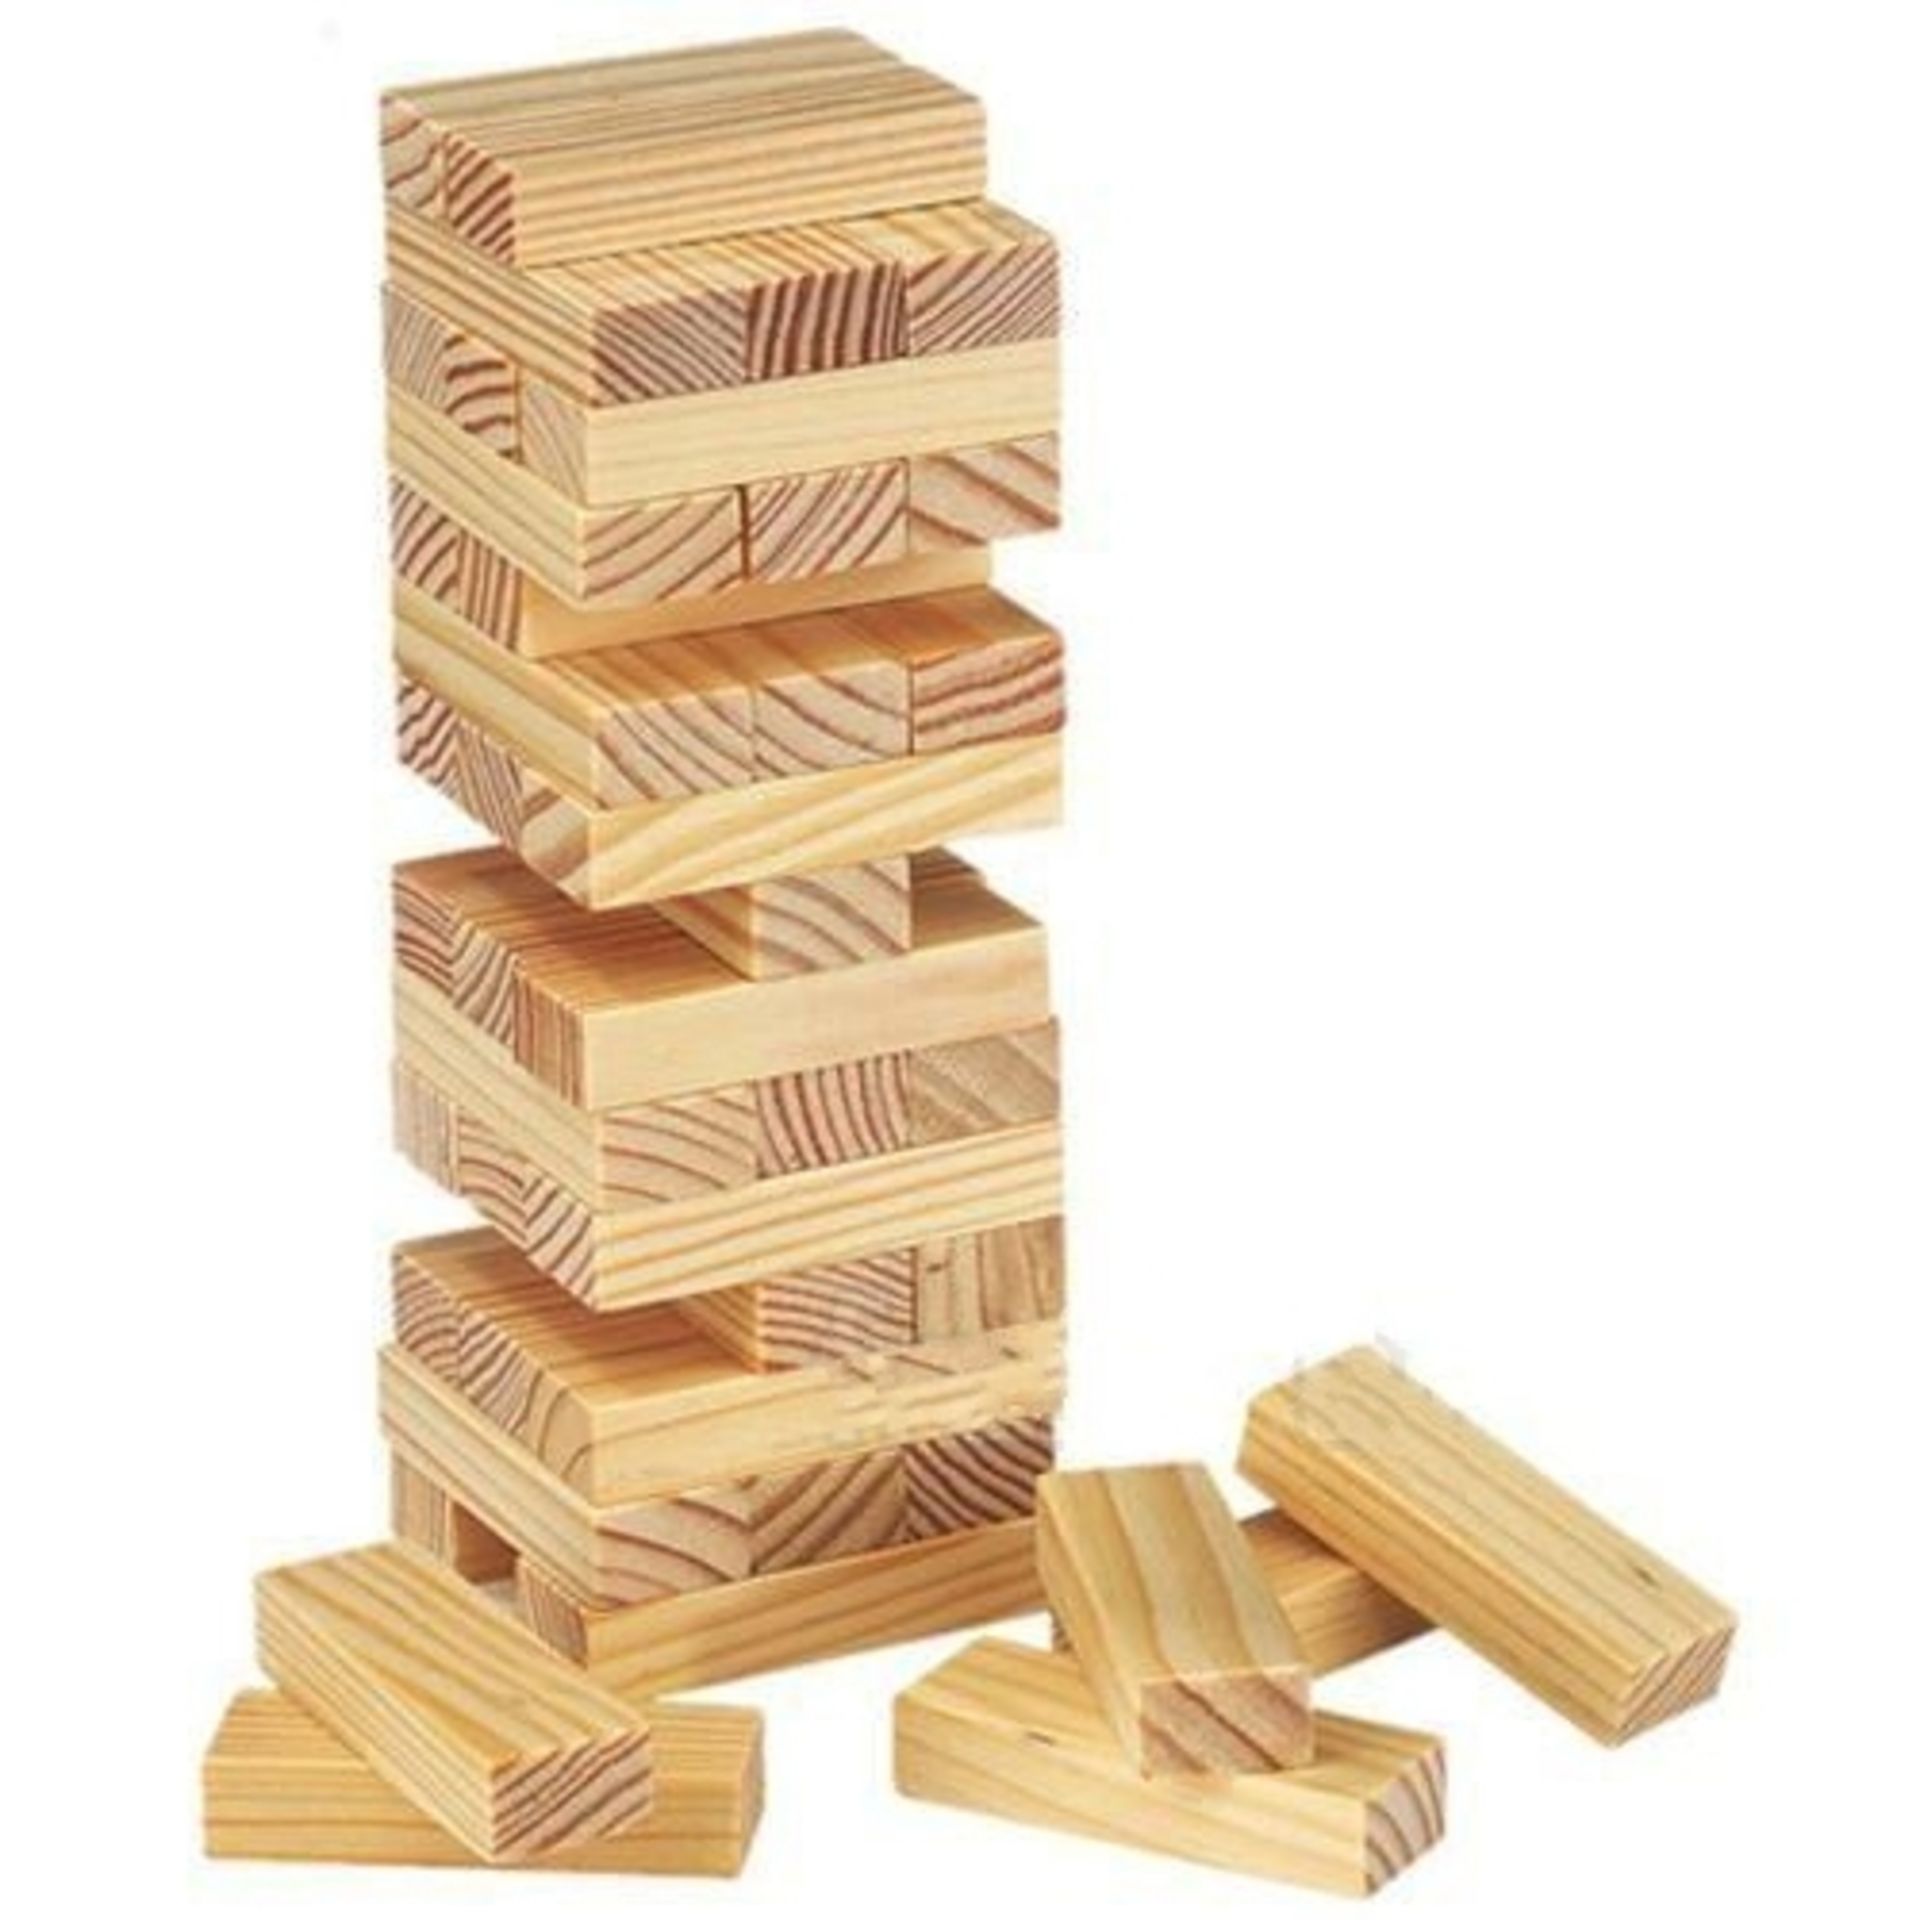 V *TRADE QTY* Brand New Quality Wooden Tower Block Game X 5 YOUR BID PRICE TO BE MULTIPLIED BY FIVE